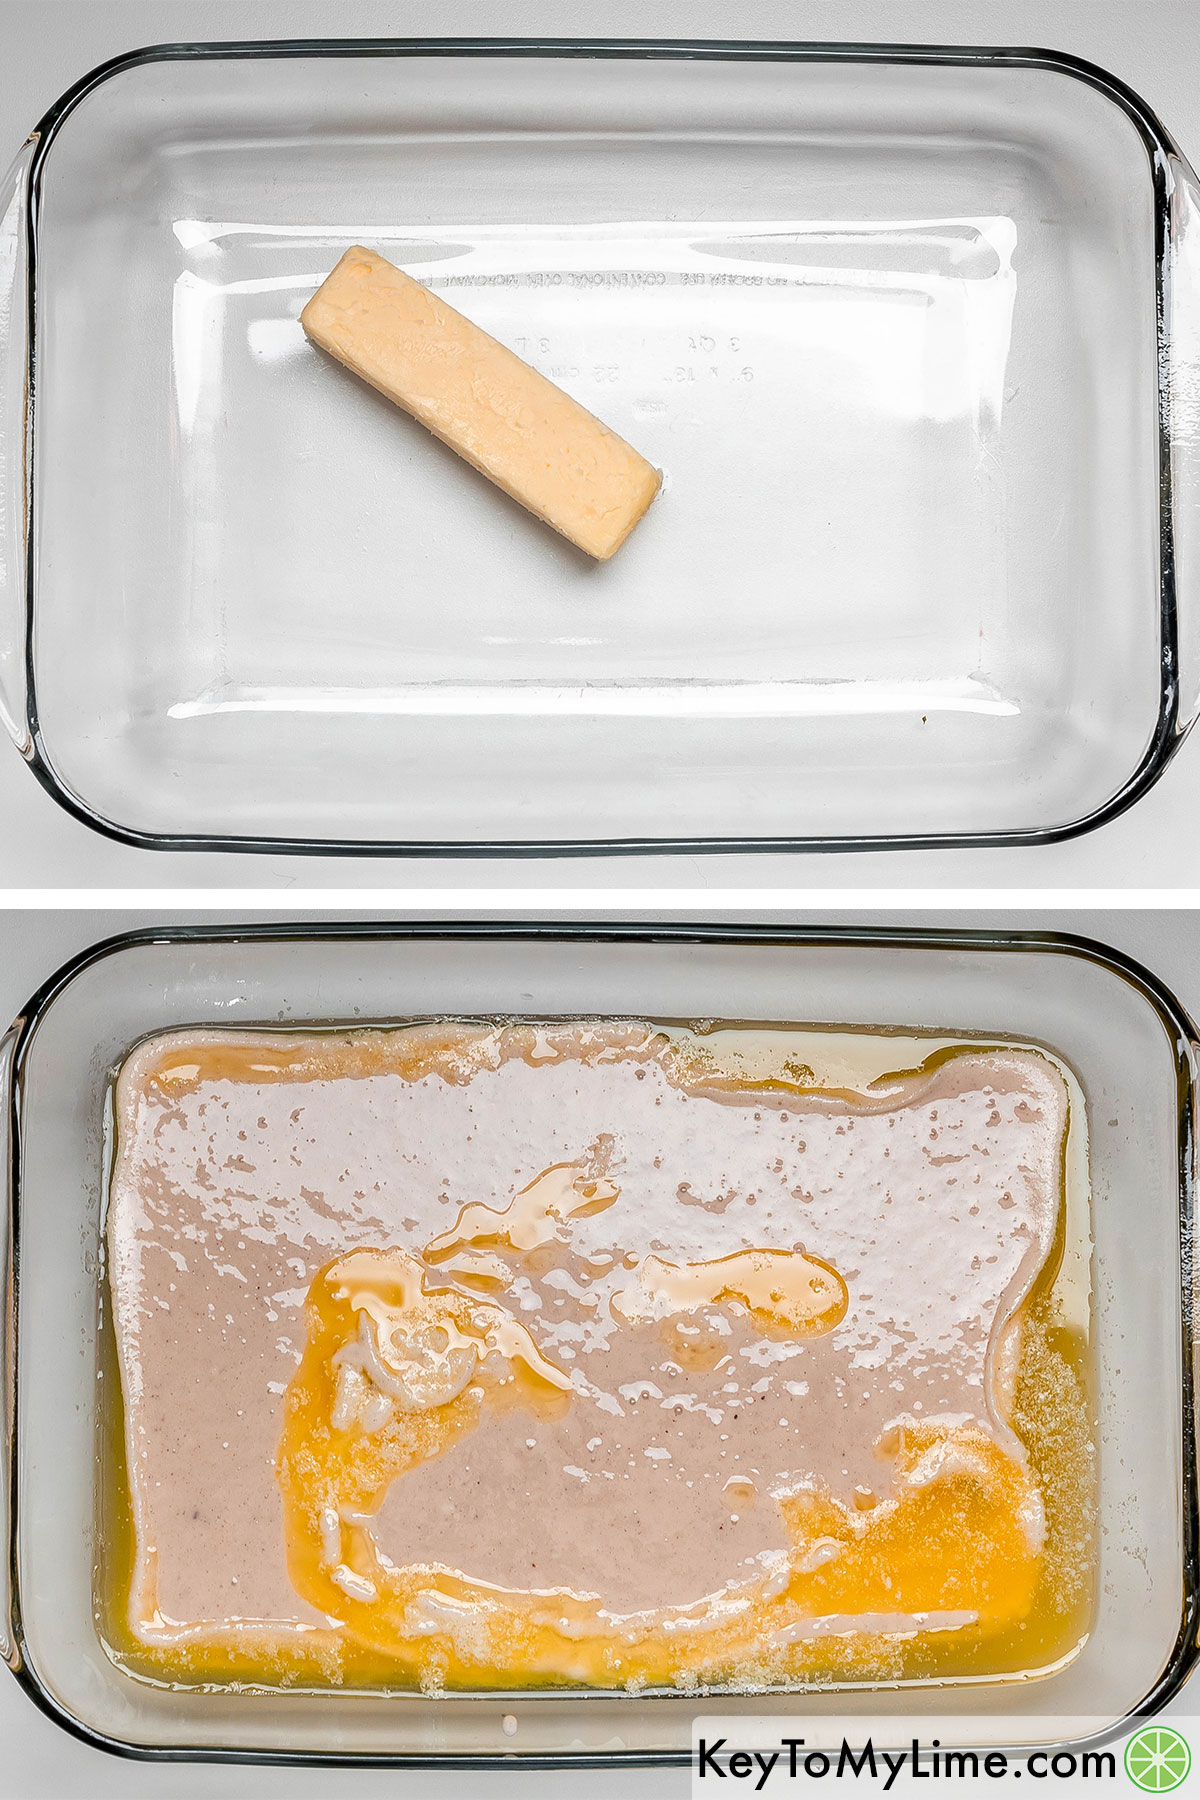 Melted a stick a butter in a casserole dish in the oven then pouring in the batter.